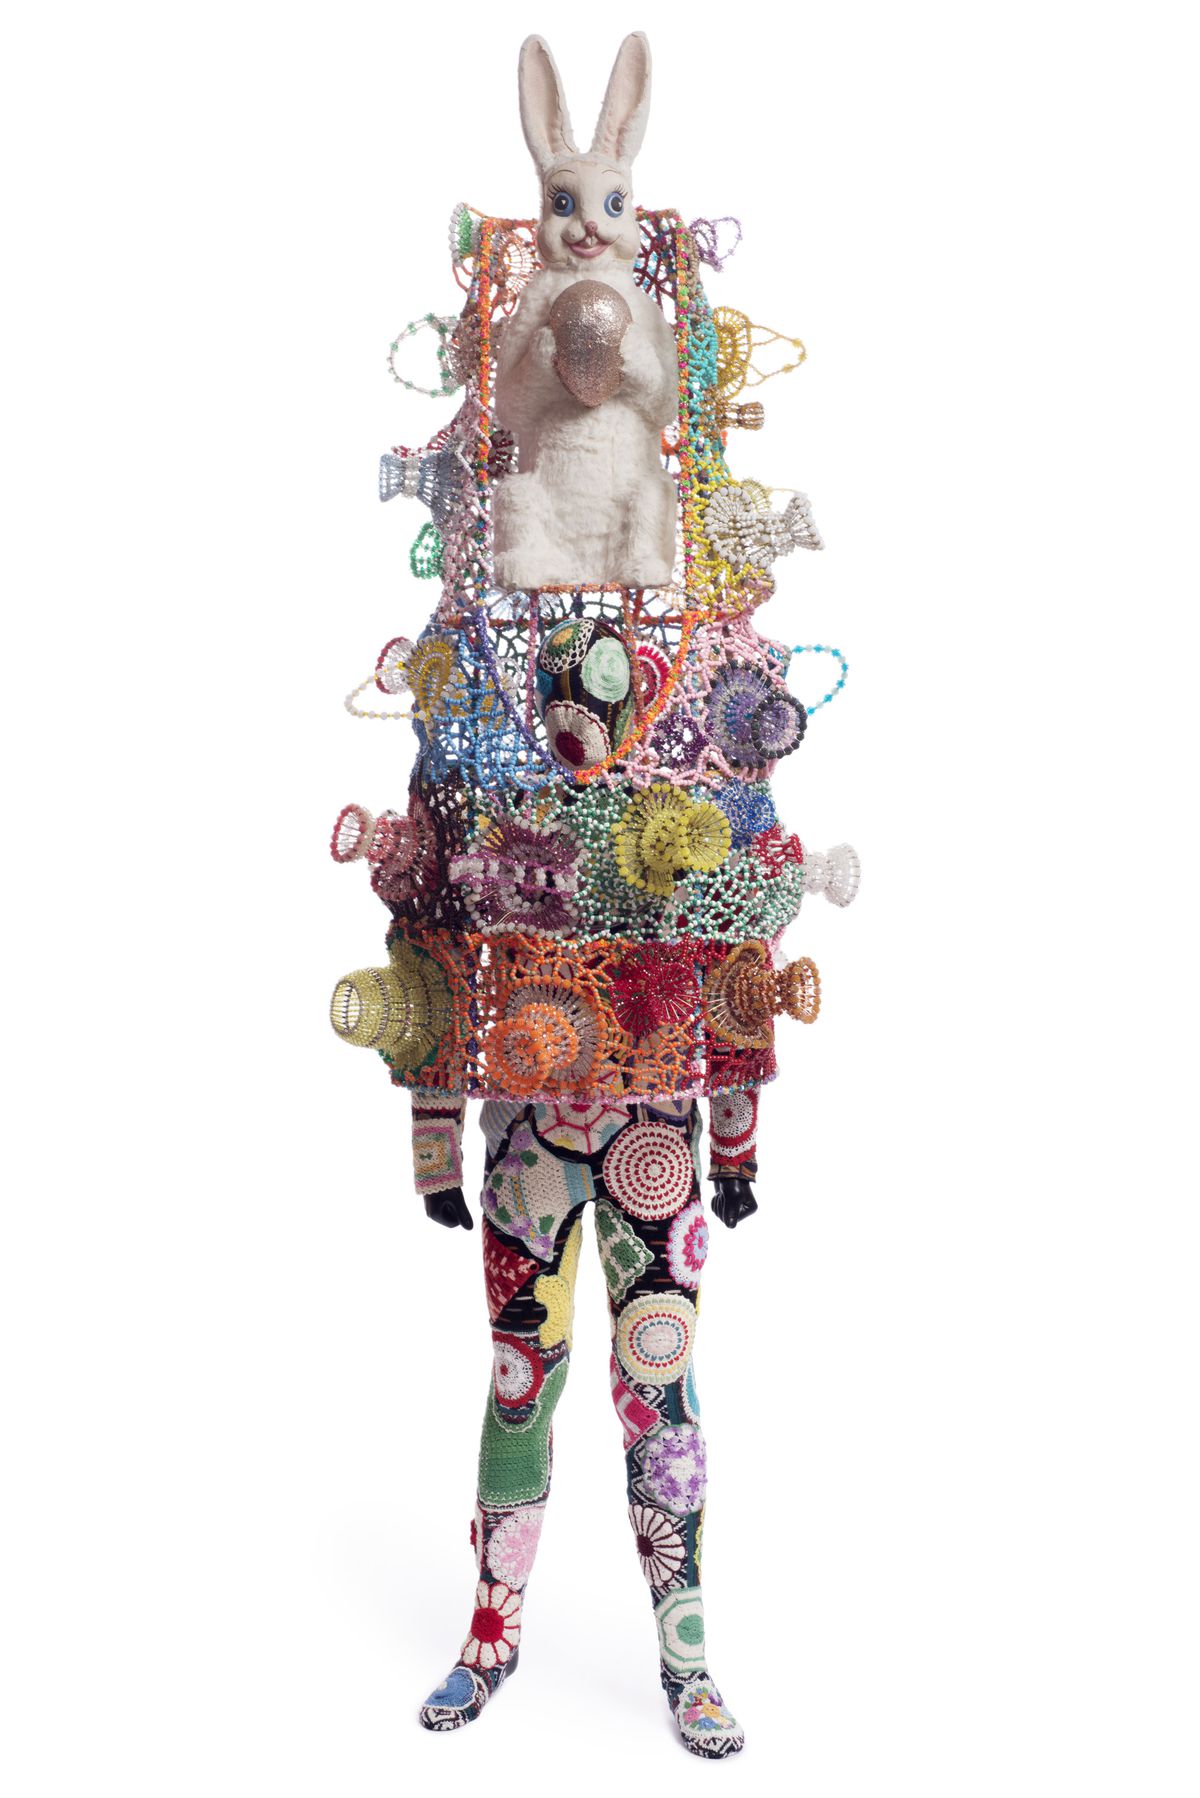 Nick Cave, “Soundsuit,” 2011. © Nick Cave. Courtesy of the artist and Jack Shainman Gallery, New York.